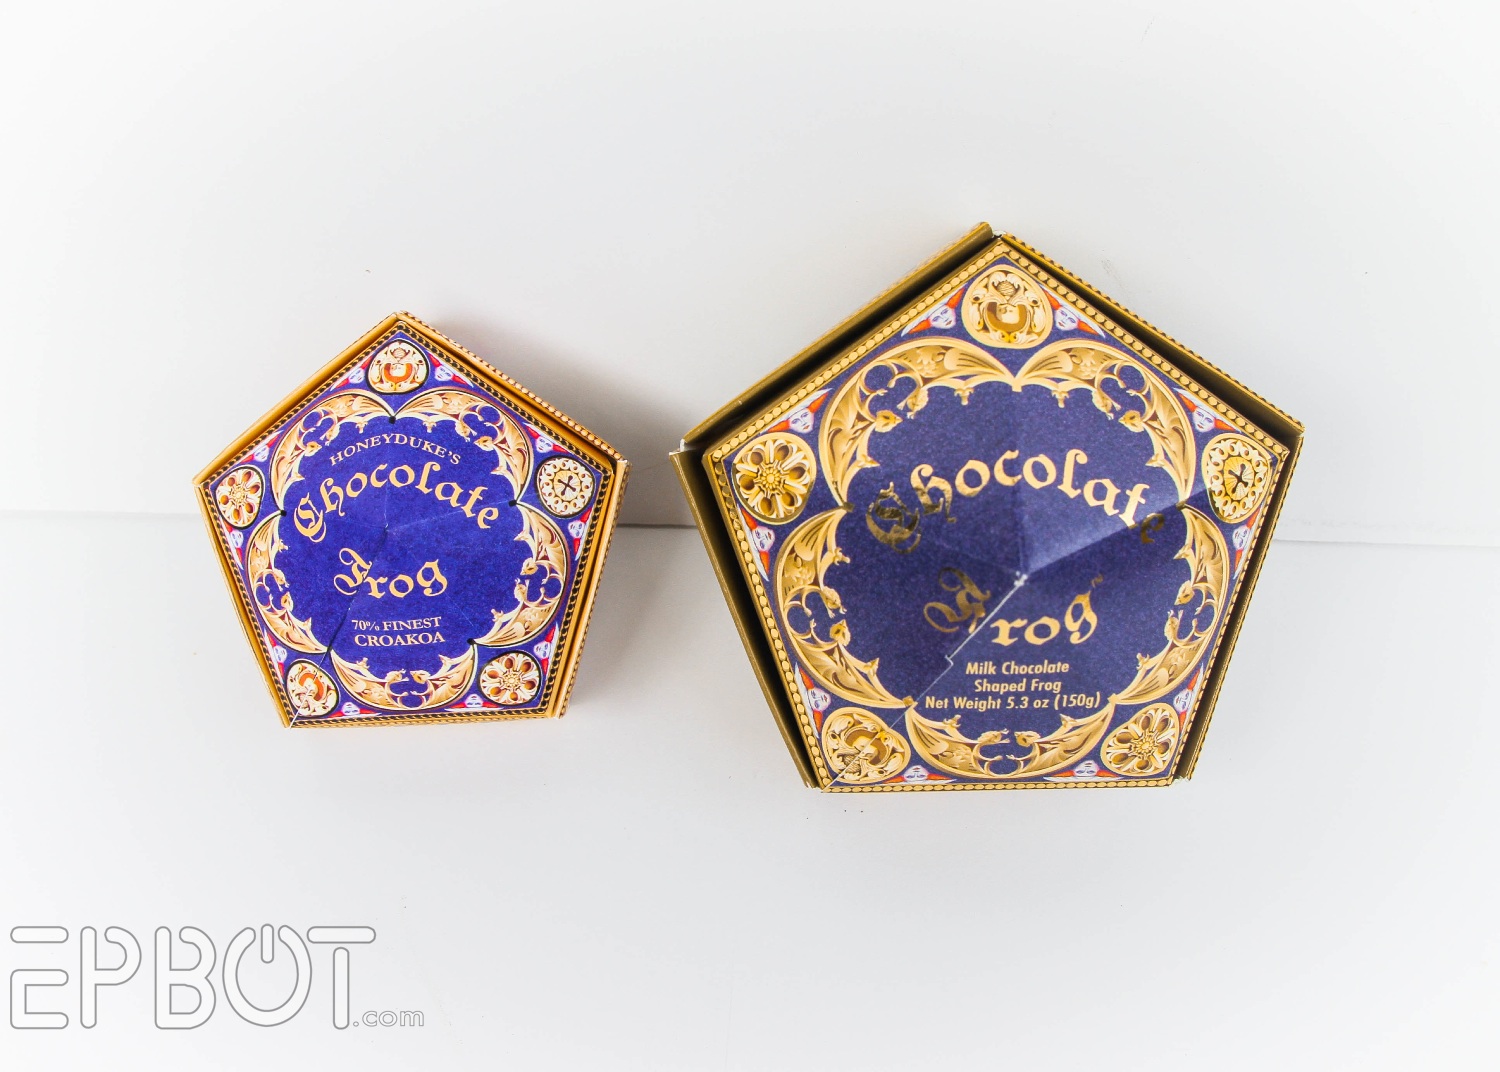 EPBOT: DIY Chocolate Frog Ornaments For Your Tree! With Regard To Chocolate Frog Card Template